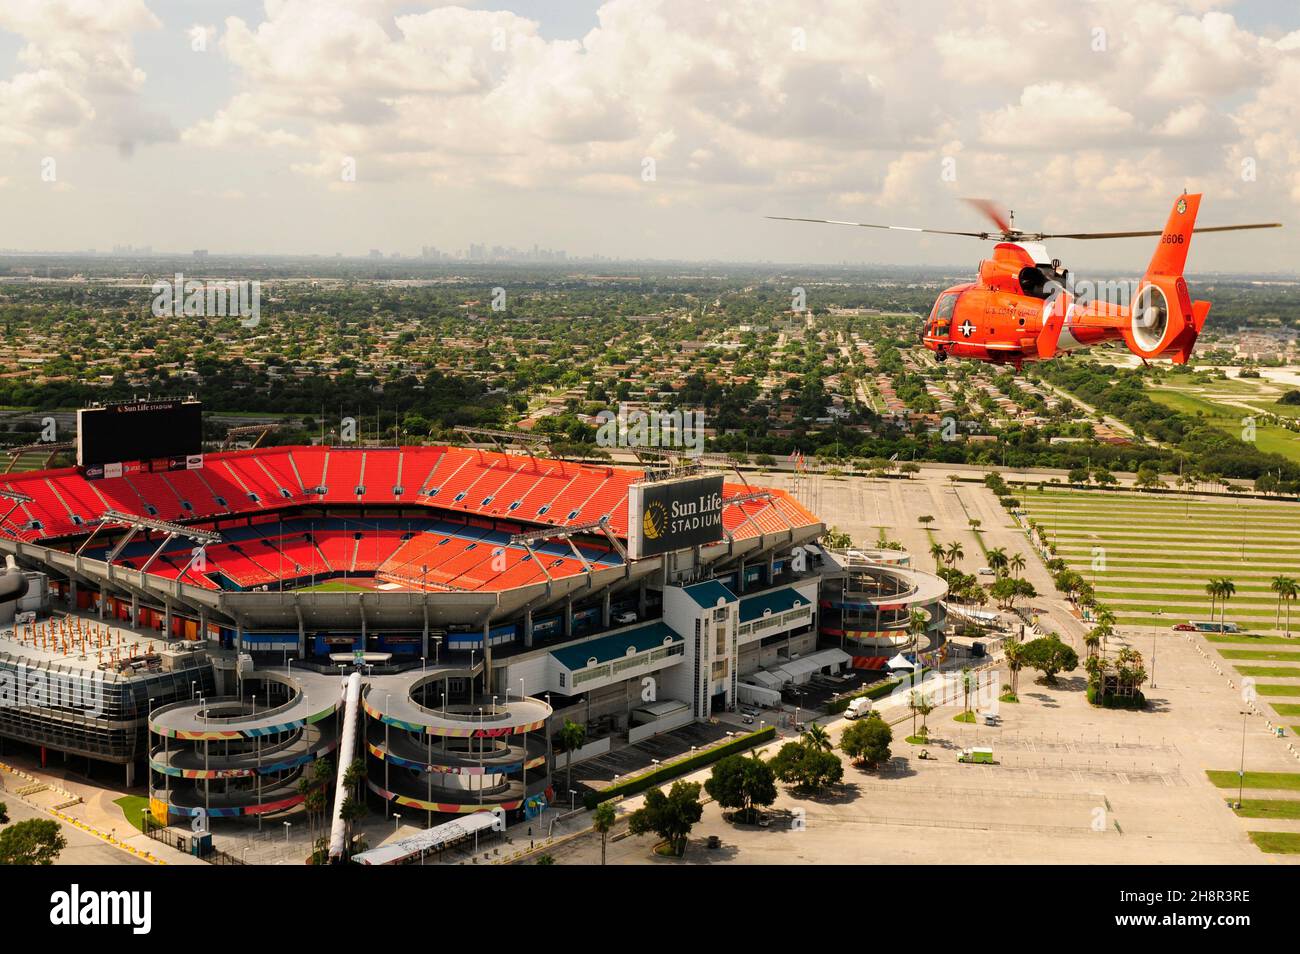 MIAMI - A Coast Guard Air Station Miami MH-65 Dolphin helicopter crew conducts a practice fly over of Sun Life Stadium Aug. 3, 2011. The Florida Marlins are scheduled to recognize the Coast Guard's 221st birthday during a pre-game ceremony Aug. 4, 2011. U.S. Coast Guard photo by Petty Officer 3rd Class Tara Molle Stock Photo